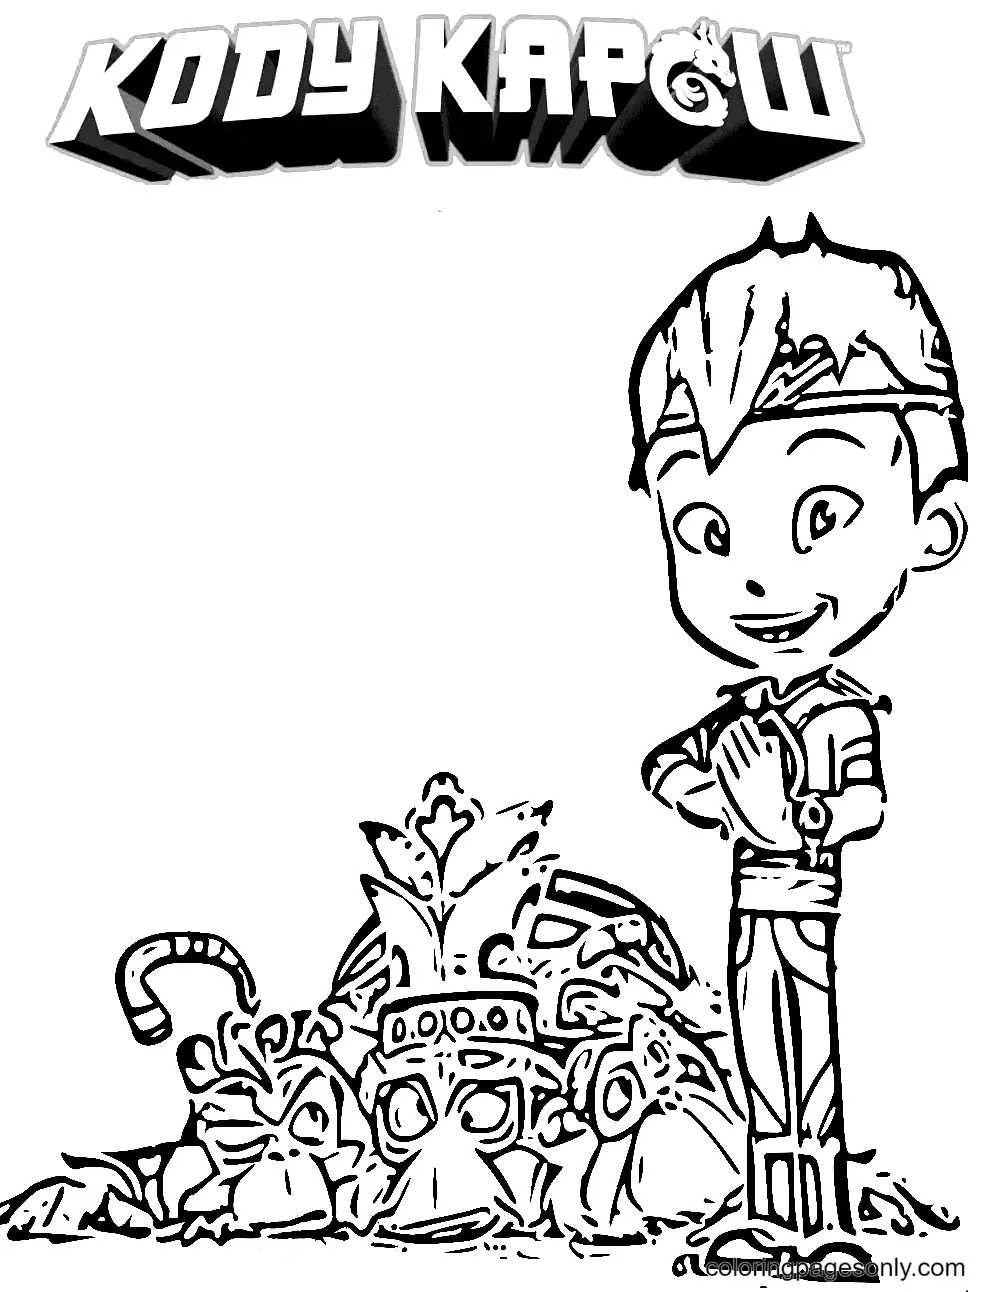 Kody Kapow Coloring Pages